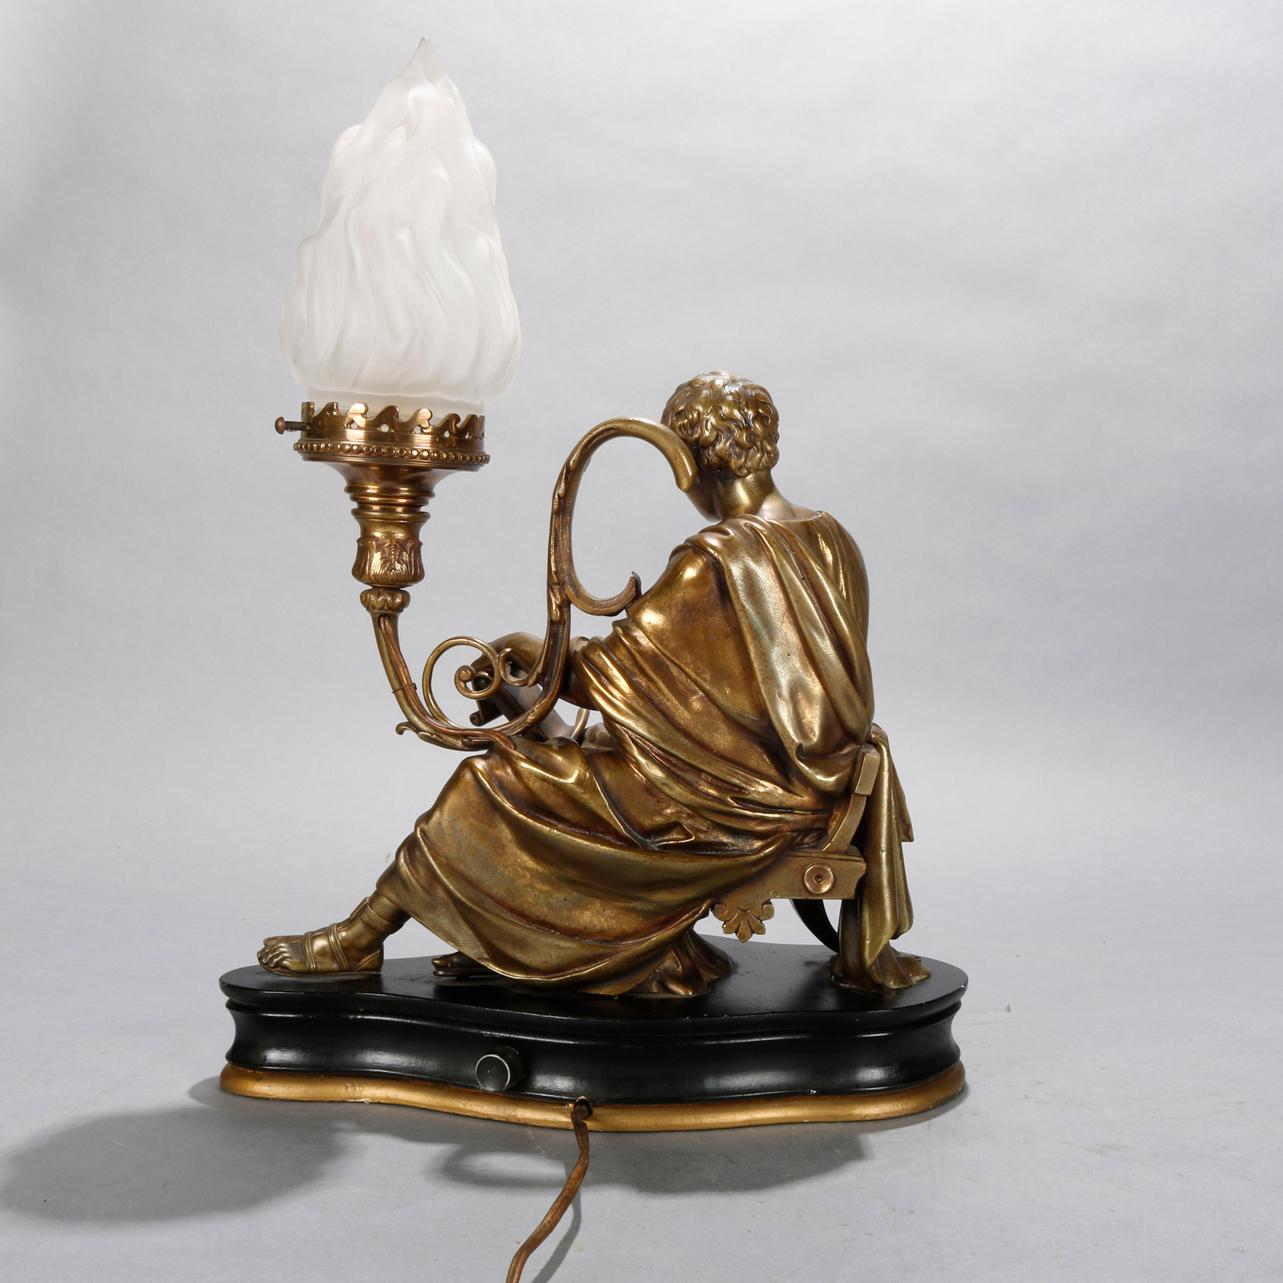 Carved Antique Classical Bronzed Recumbent Robed Scholar Figural Table Lamp